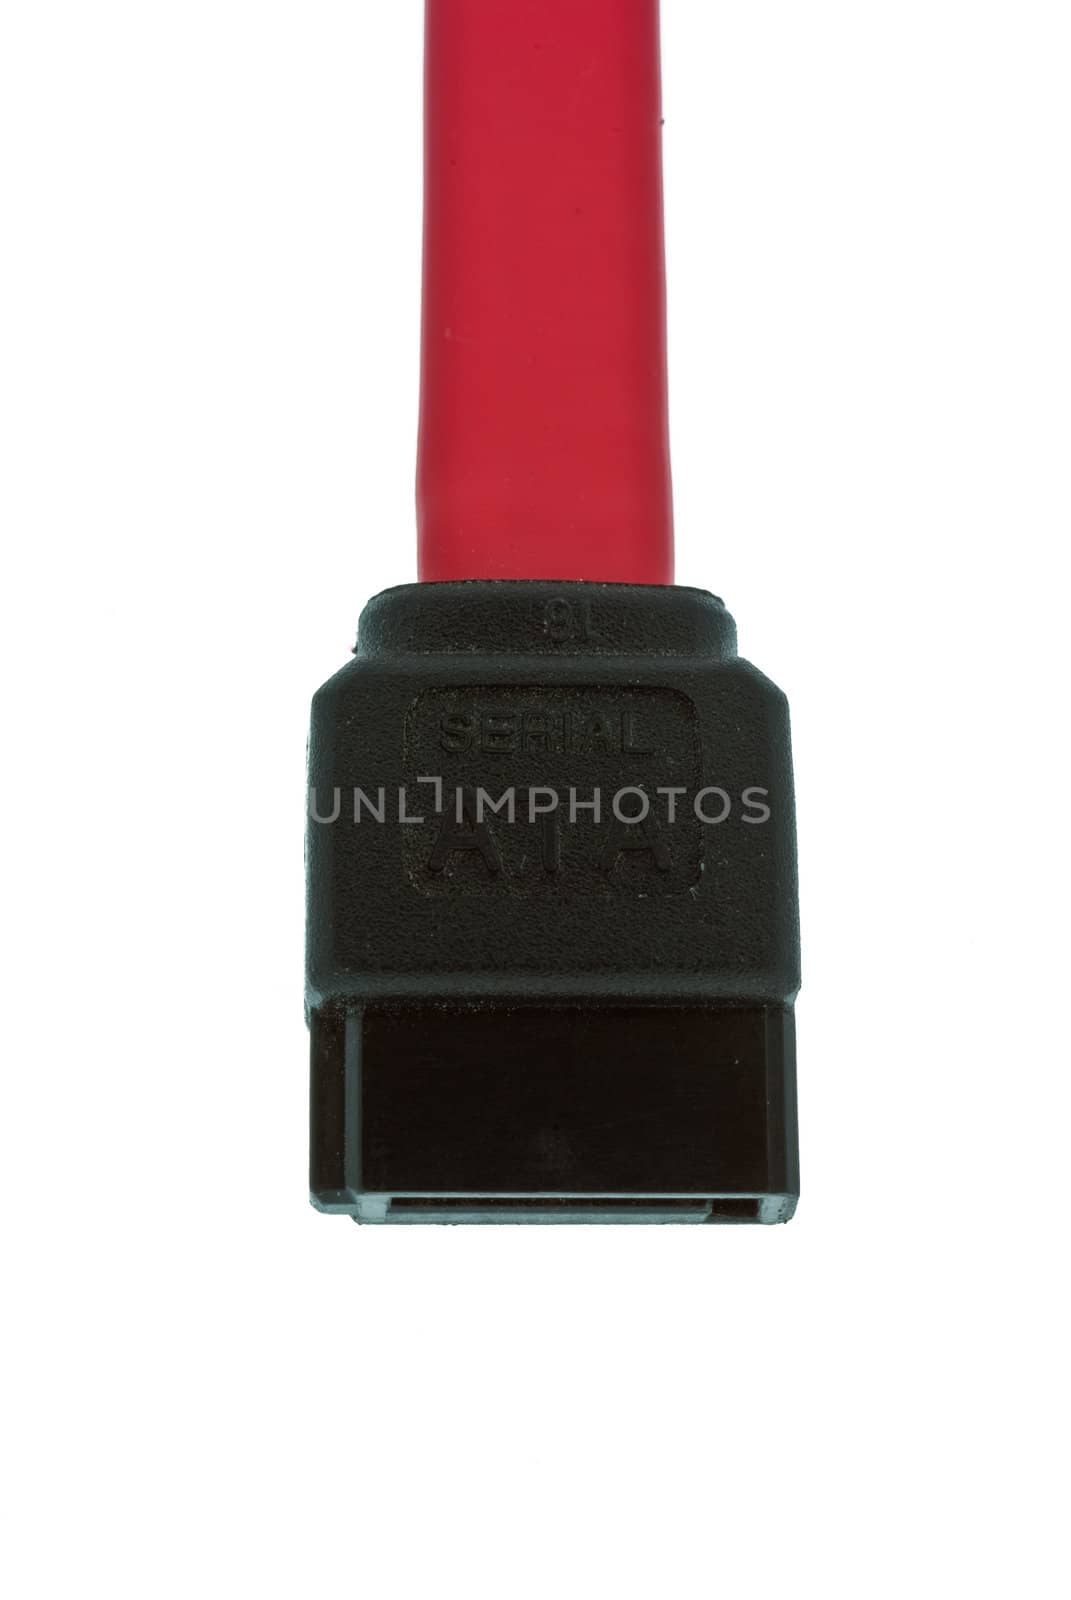 SATA connector and red cable isolated on white